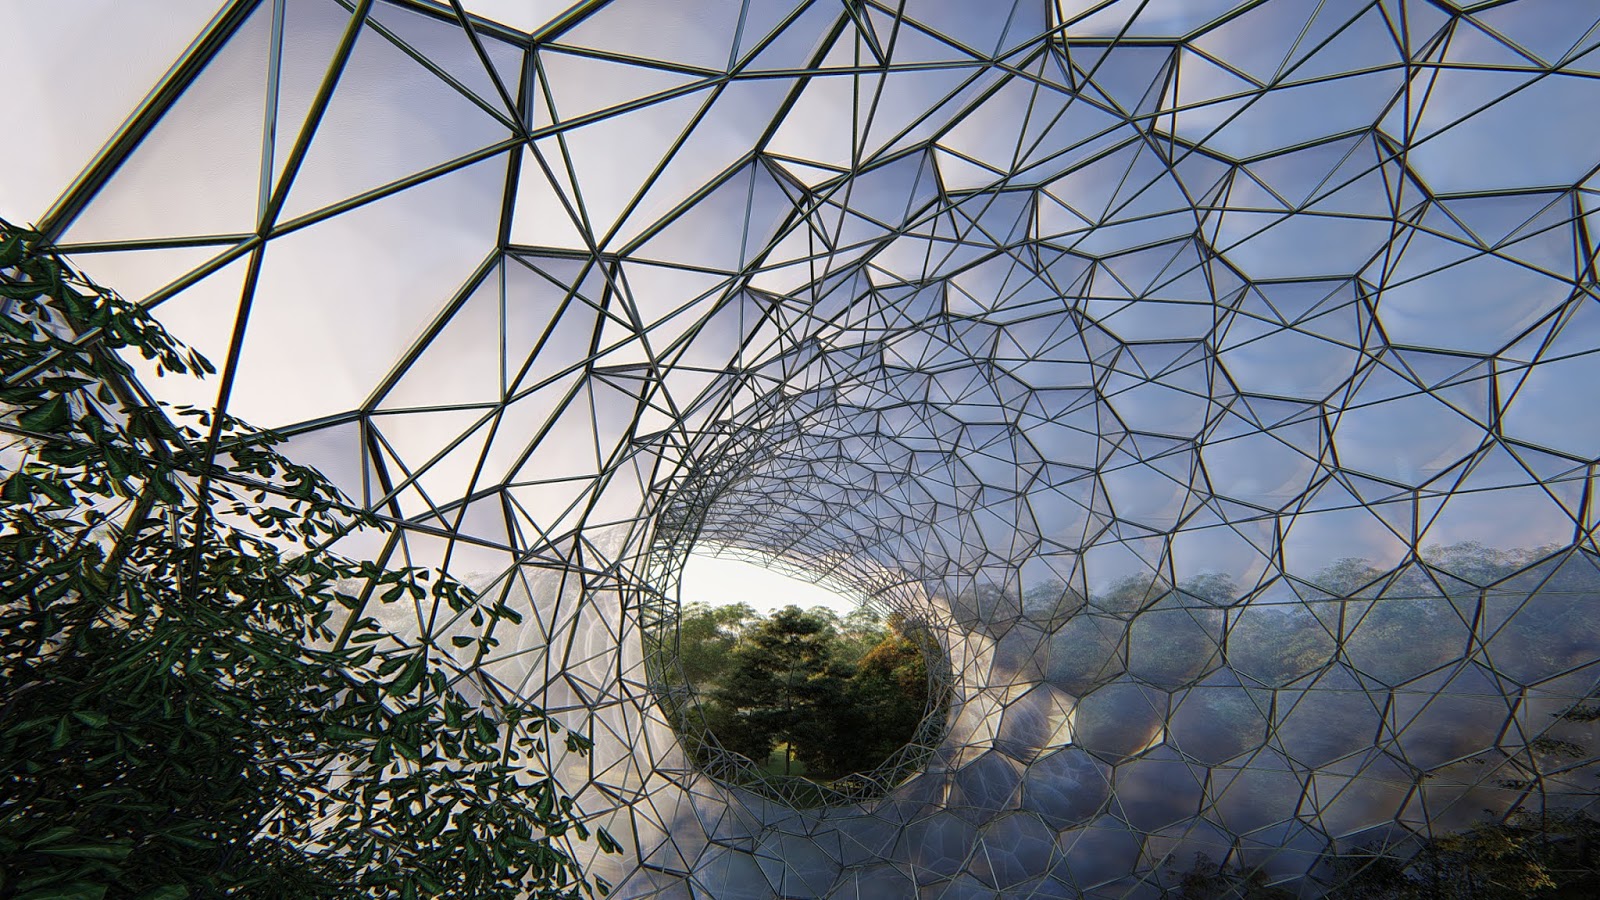 Parametric Design and Buildings – The 6 Ways Technology Will Change